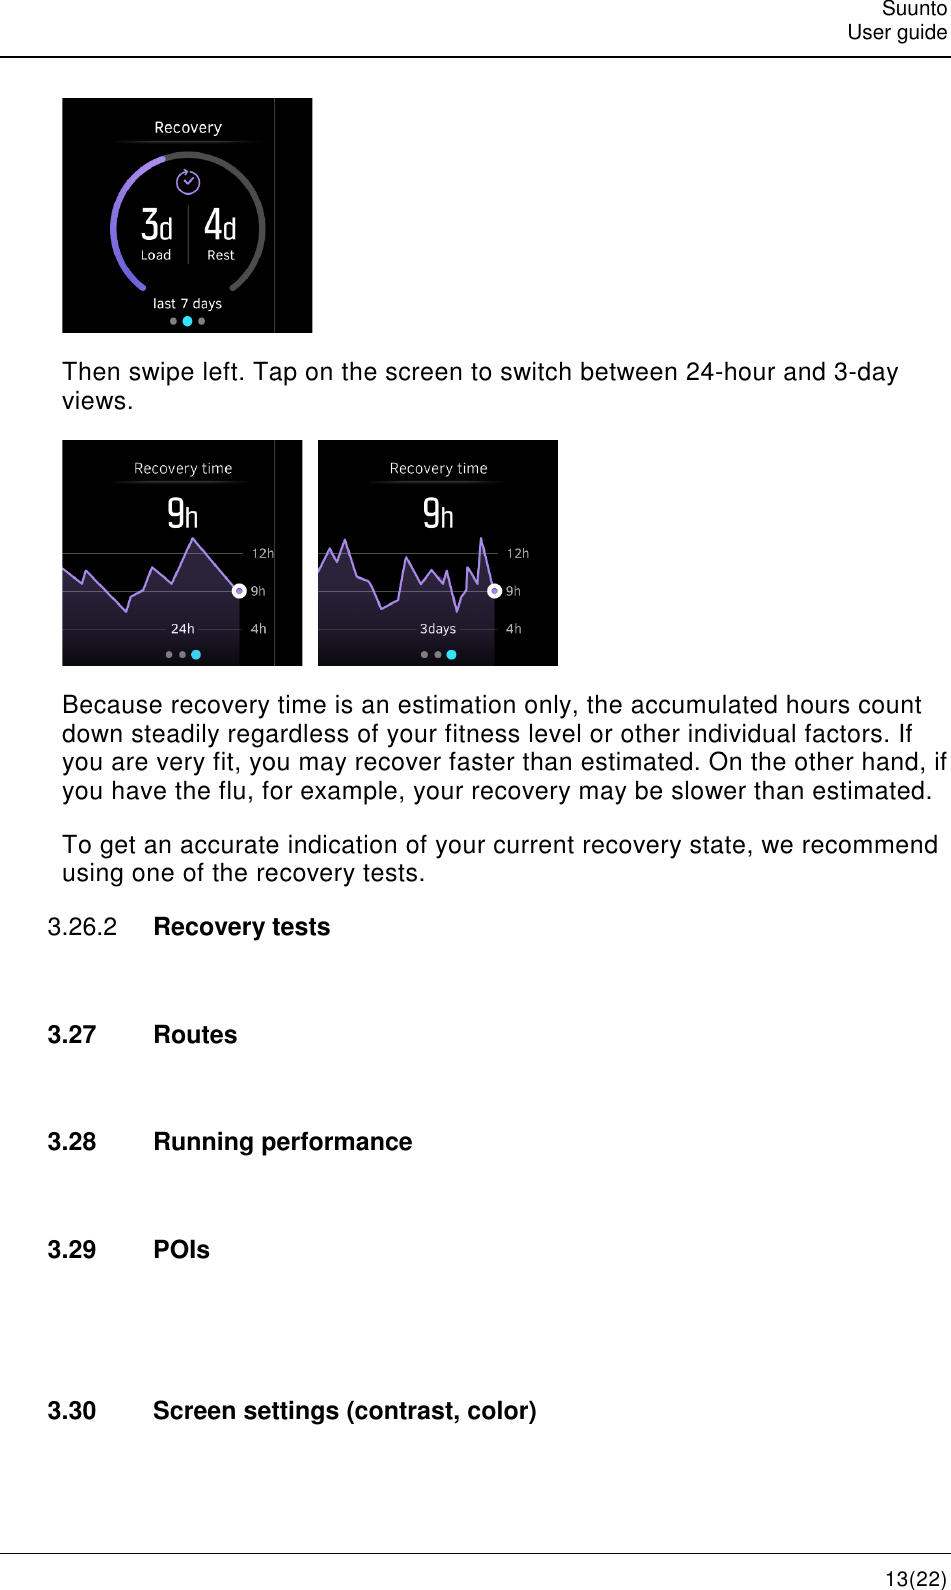    Then swipe left. Tap on the screen to switch between 24views. Because recovery time is an estimatdown steadily regardless of your fitness level or other you are very fit, you may recover faster than estimated. On the other you have the flu, for To get an accurate indusing one of the recover3.26.2  Recovery tests 3.27  Routes  3.28 Running performance 3.29  POIs   3.30 Screen settings (contrast, color)  Tap on the screen to switch between 24-    Because recovery time is an estimation only, the accumulated hours down steadily regardless of your fitness level or other individual factors. If very fit, you may recover faster than estimated. On the other you have the flu, for example, your recovery may be slower than estimated.To get an accurate indication of your current recovery state, we using one of the recovery tests. tests Running performance Screen settings (contrast, color) Suunto User guide 13(22) -hour and 3-day ion only, the accumulated hours count individual factors. If very fit, you may recover faster than estimated. On the other hand, if example, your recovery may be slower than estimated. recovery state, we recommend 